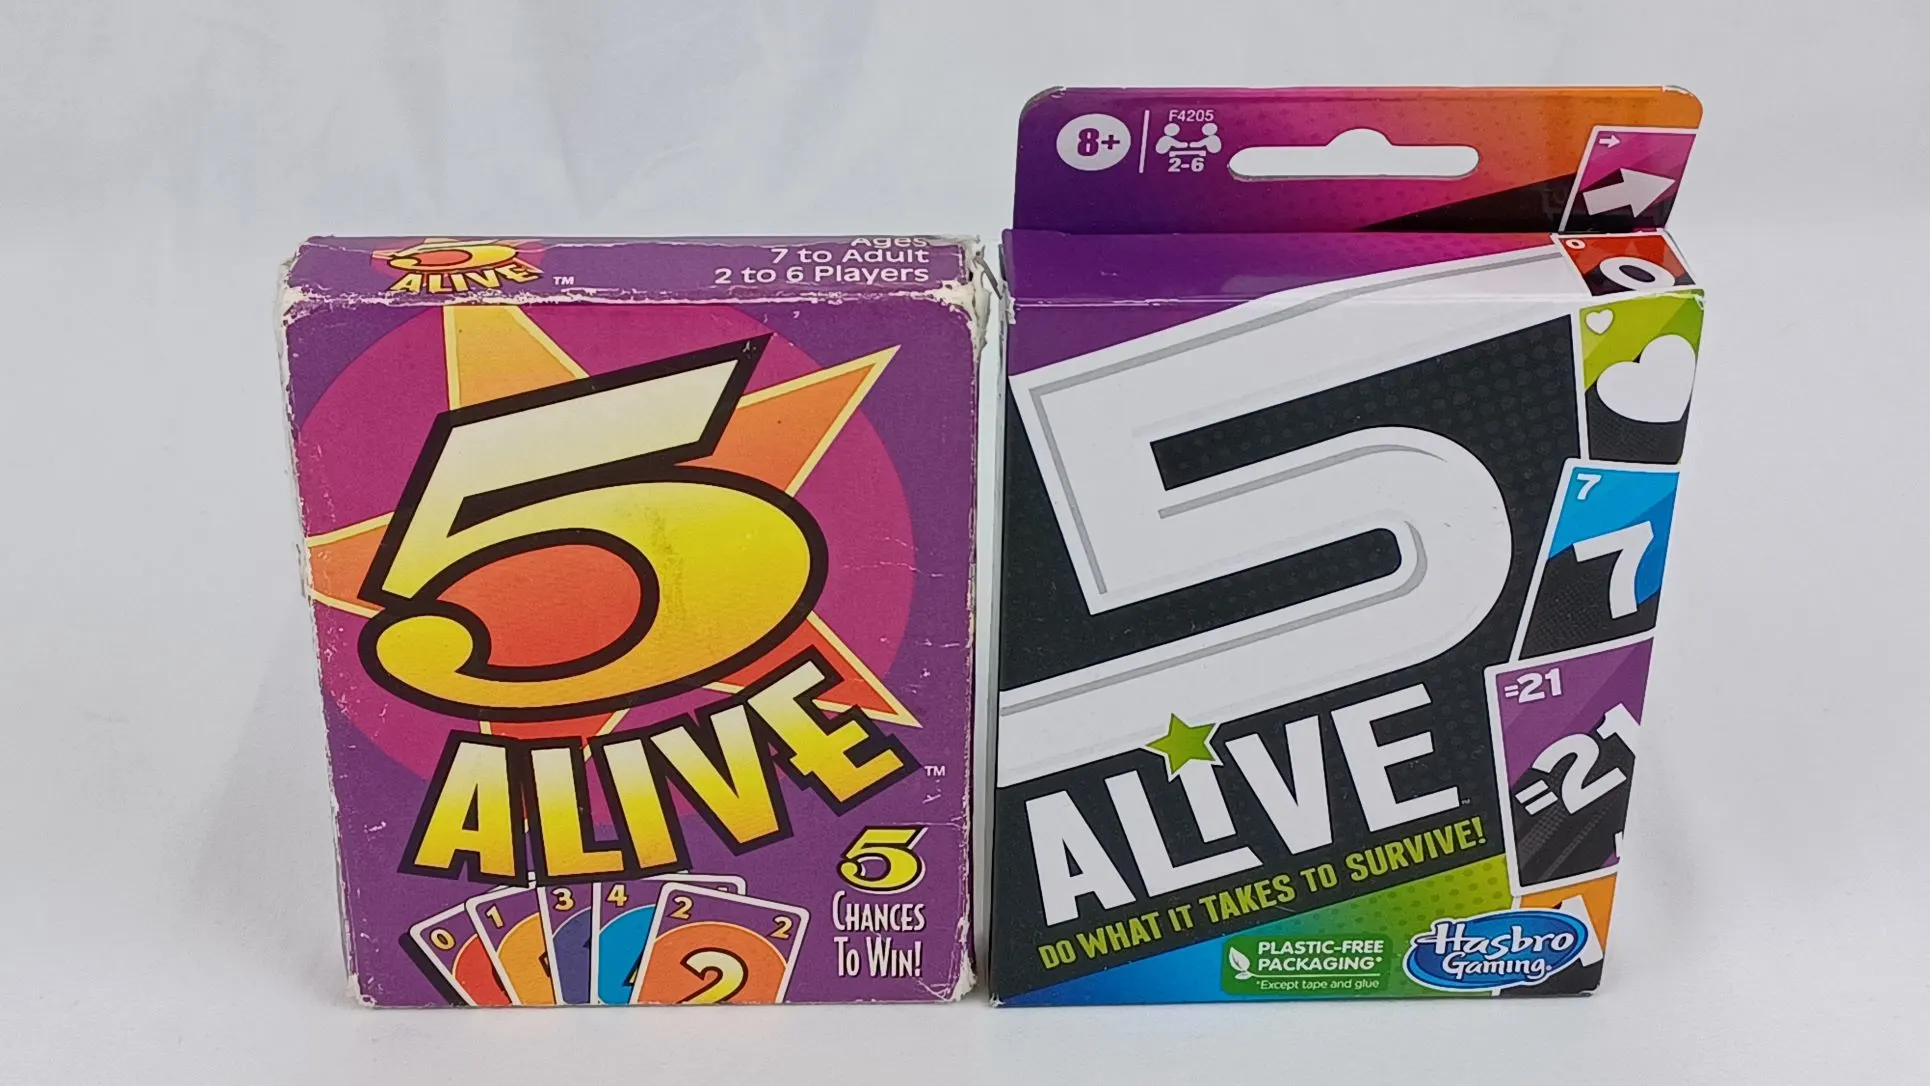 Box for 5 Alive